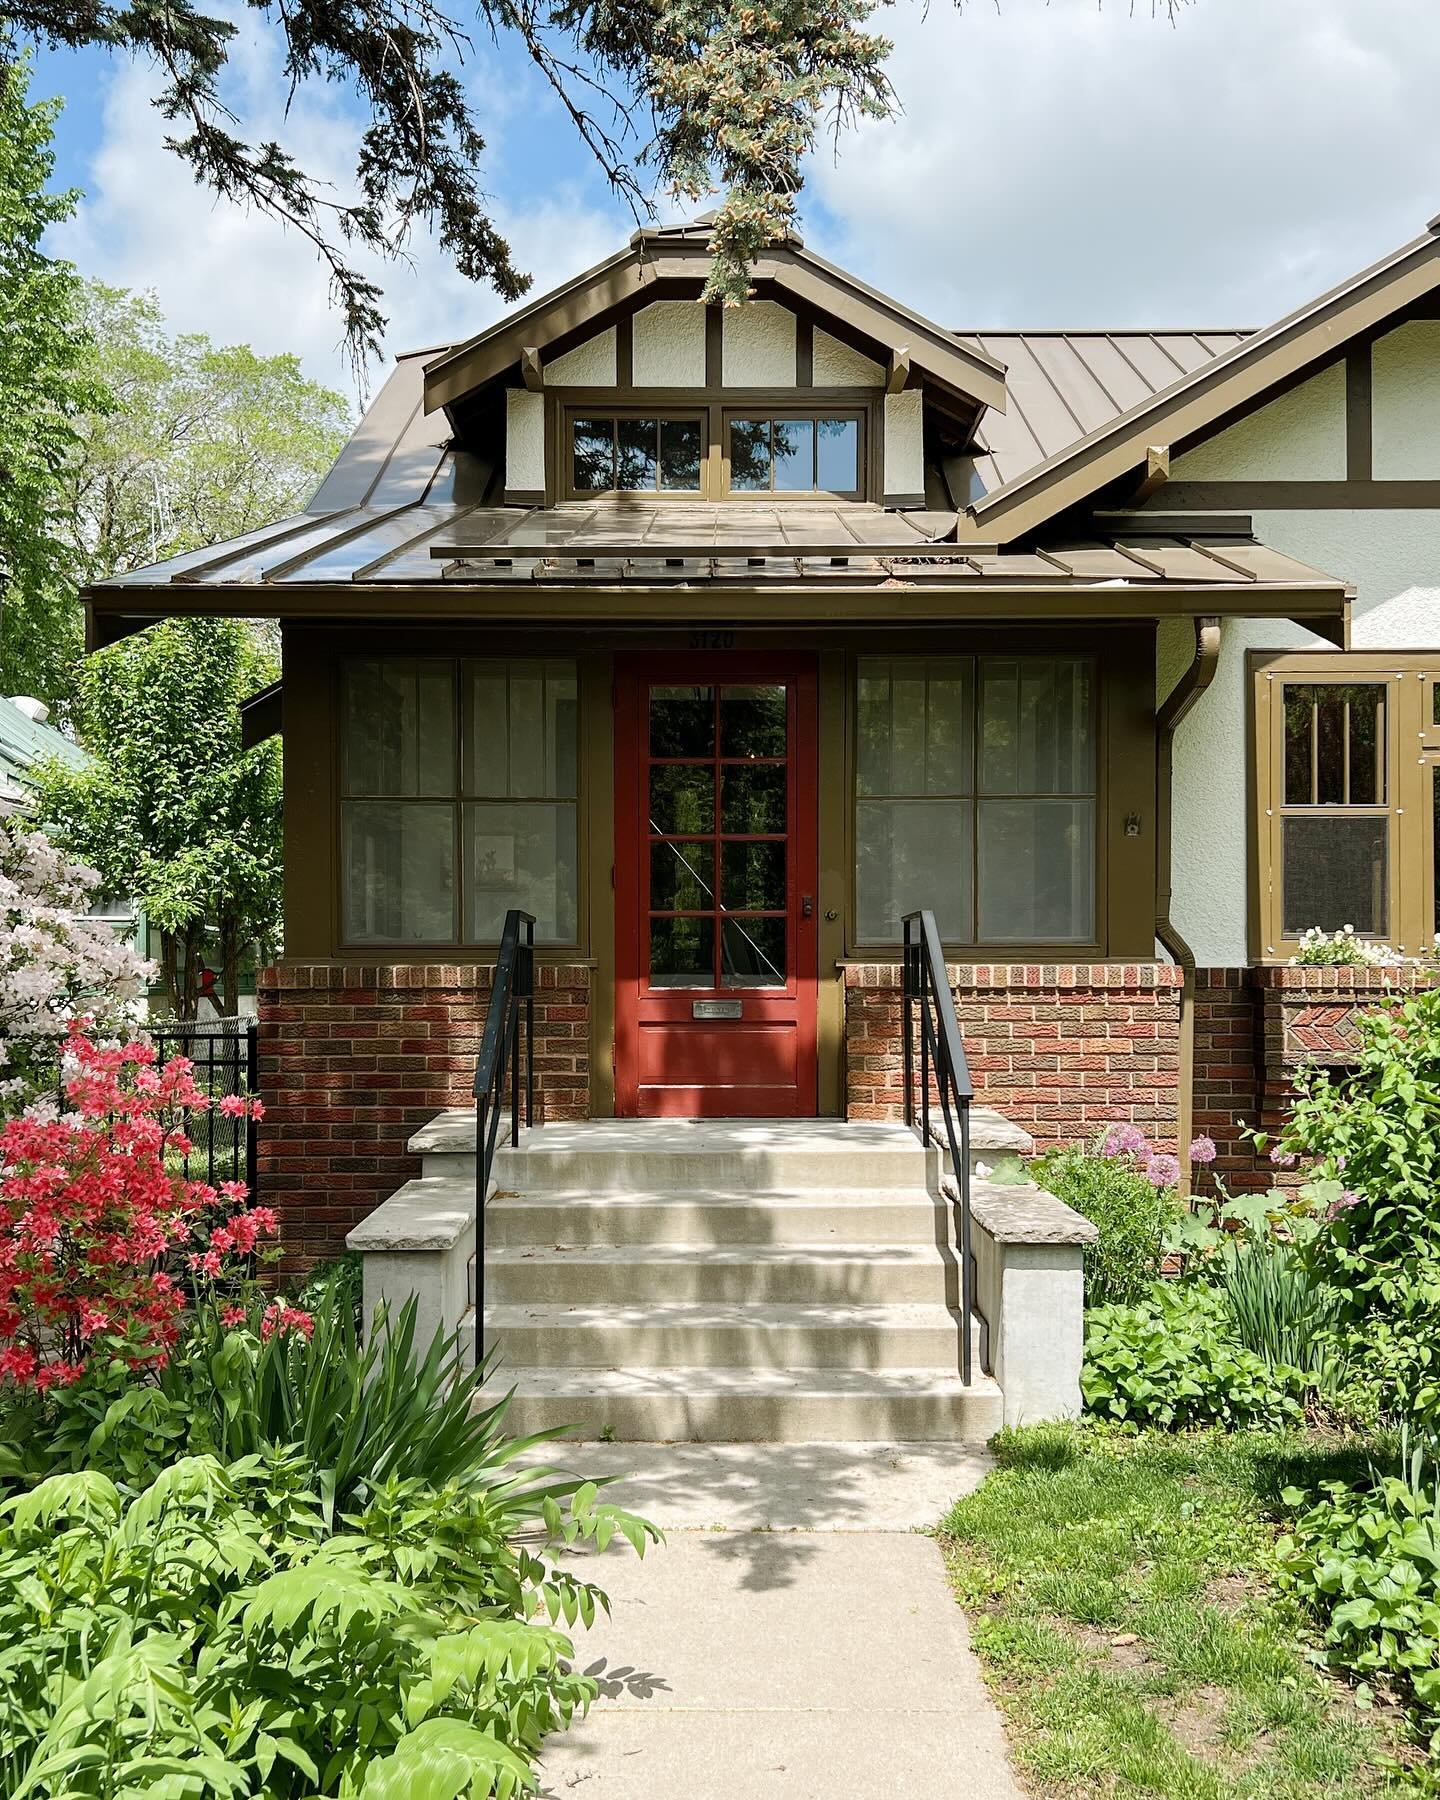 Love this 1926 Arts and Crafts Bungalow right off E Minnehaha Parkway. Tons of original charm throughout. Even has a 3 car garage!

Interested in finding your own home to love? Fill out my &lsquo;buy with me&rsquo; contact form in my profile and we&r